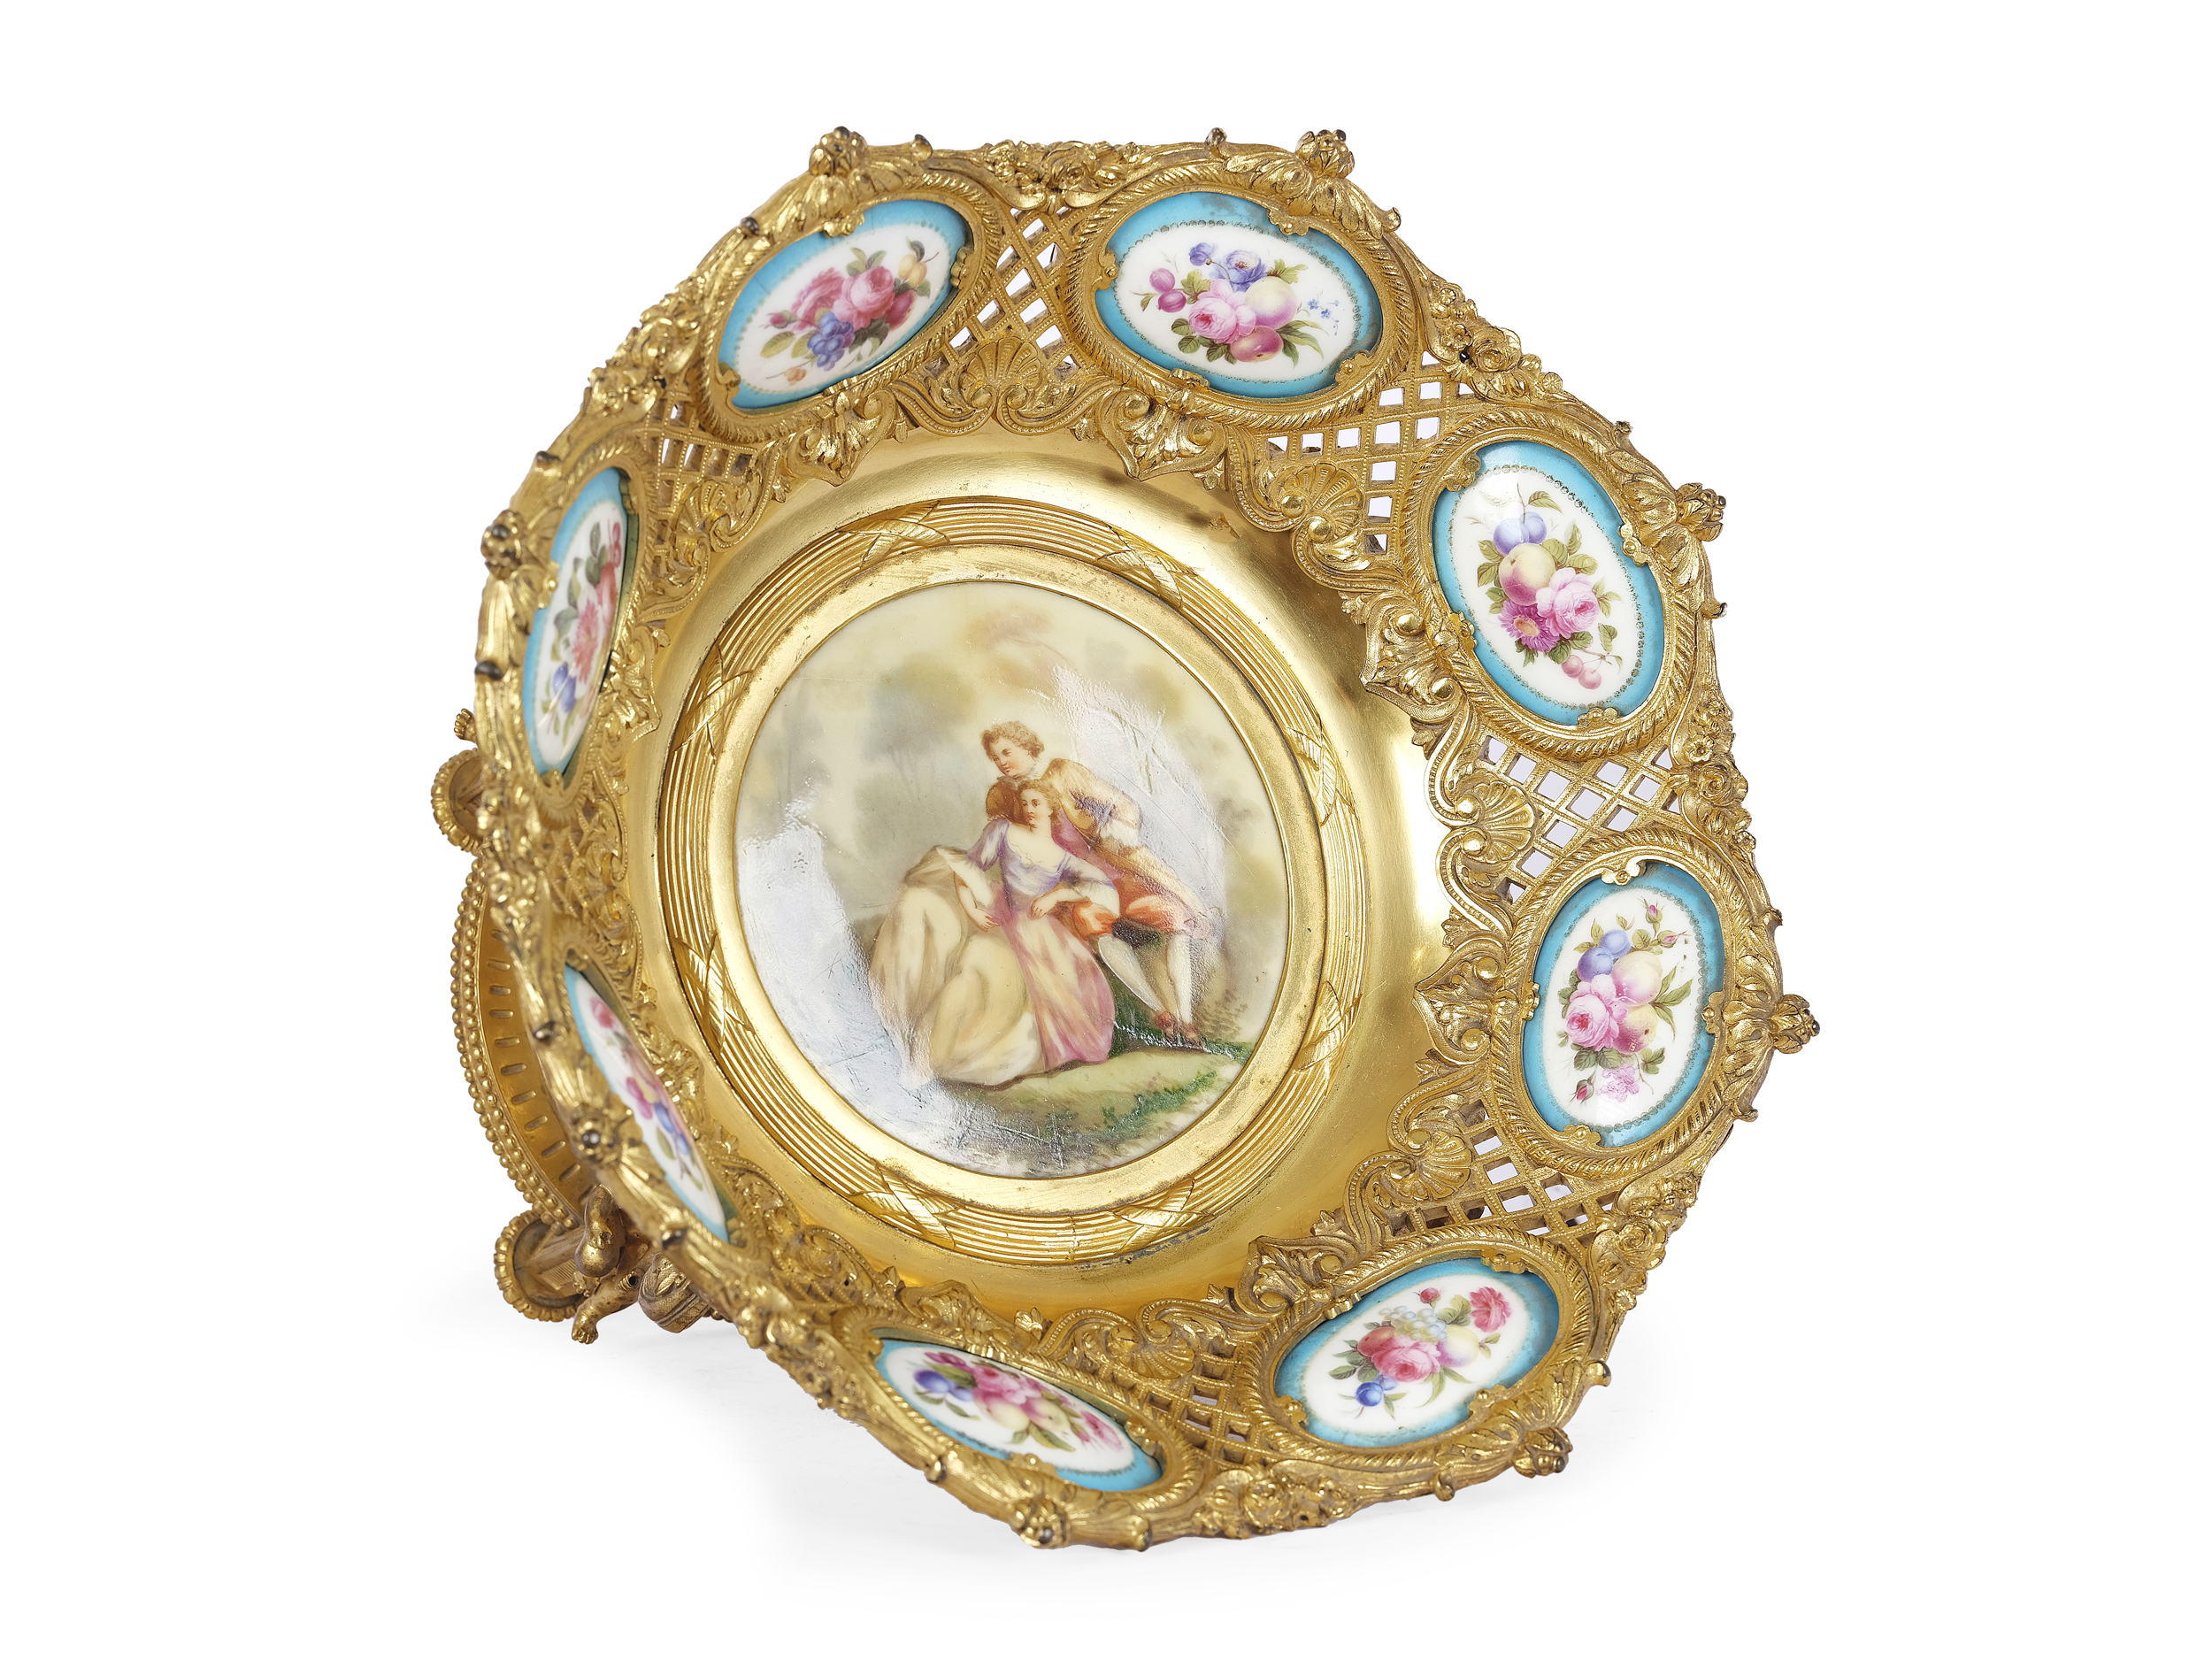 Centrepiece, mid 19th century, porcelain plates from Sèvres - Image 4 of 7